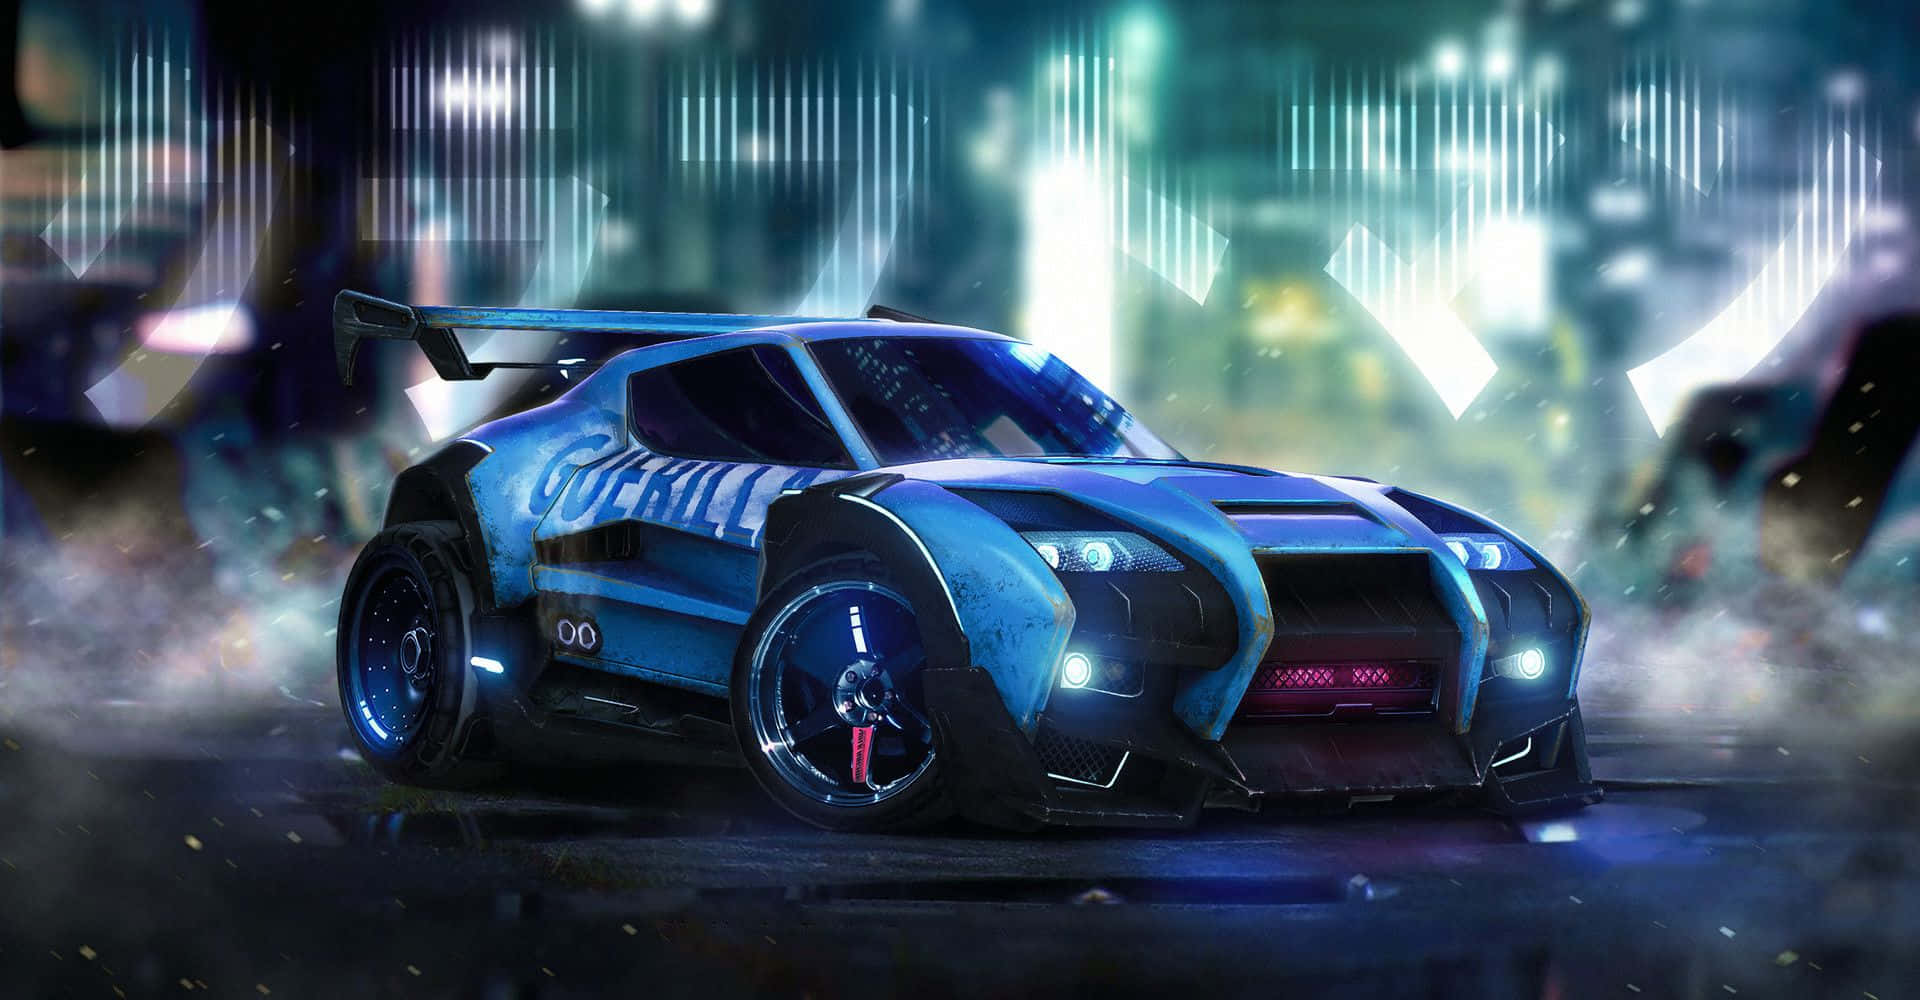 Customize your Rocket League car and drive your way to success!